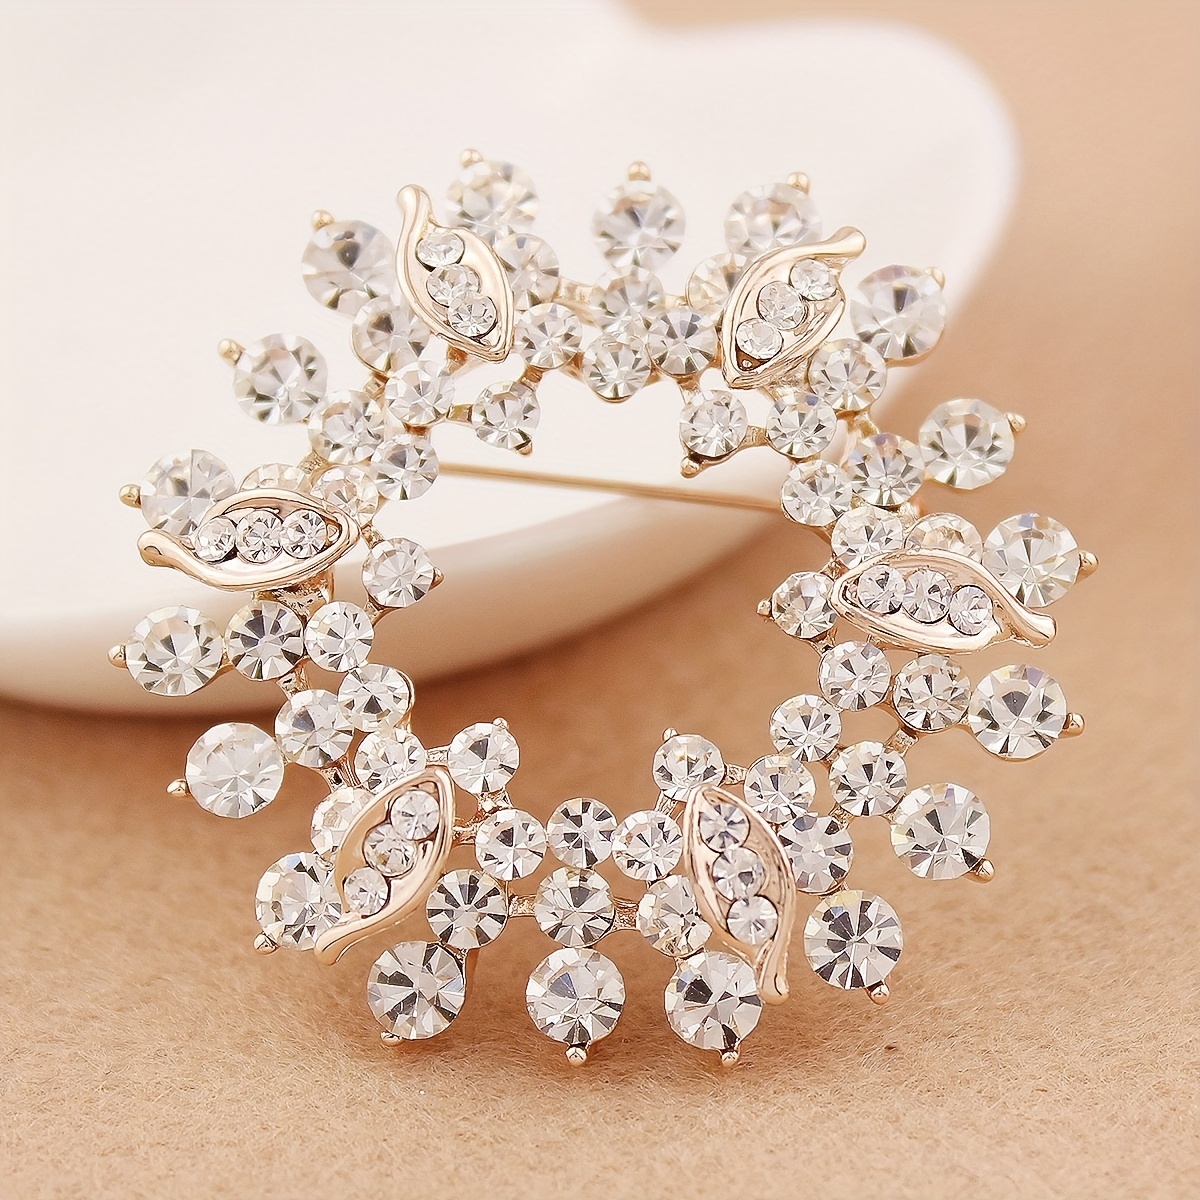 1pc Women's Crystal & Rhinestone Brooch Pin Suitable For Daily Wear